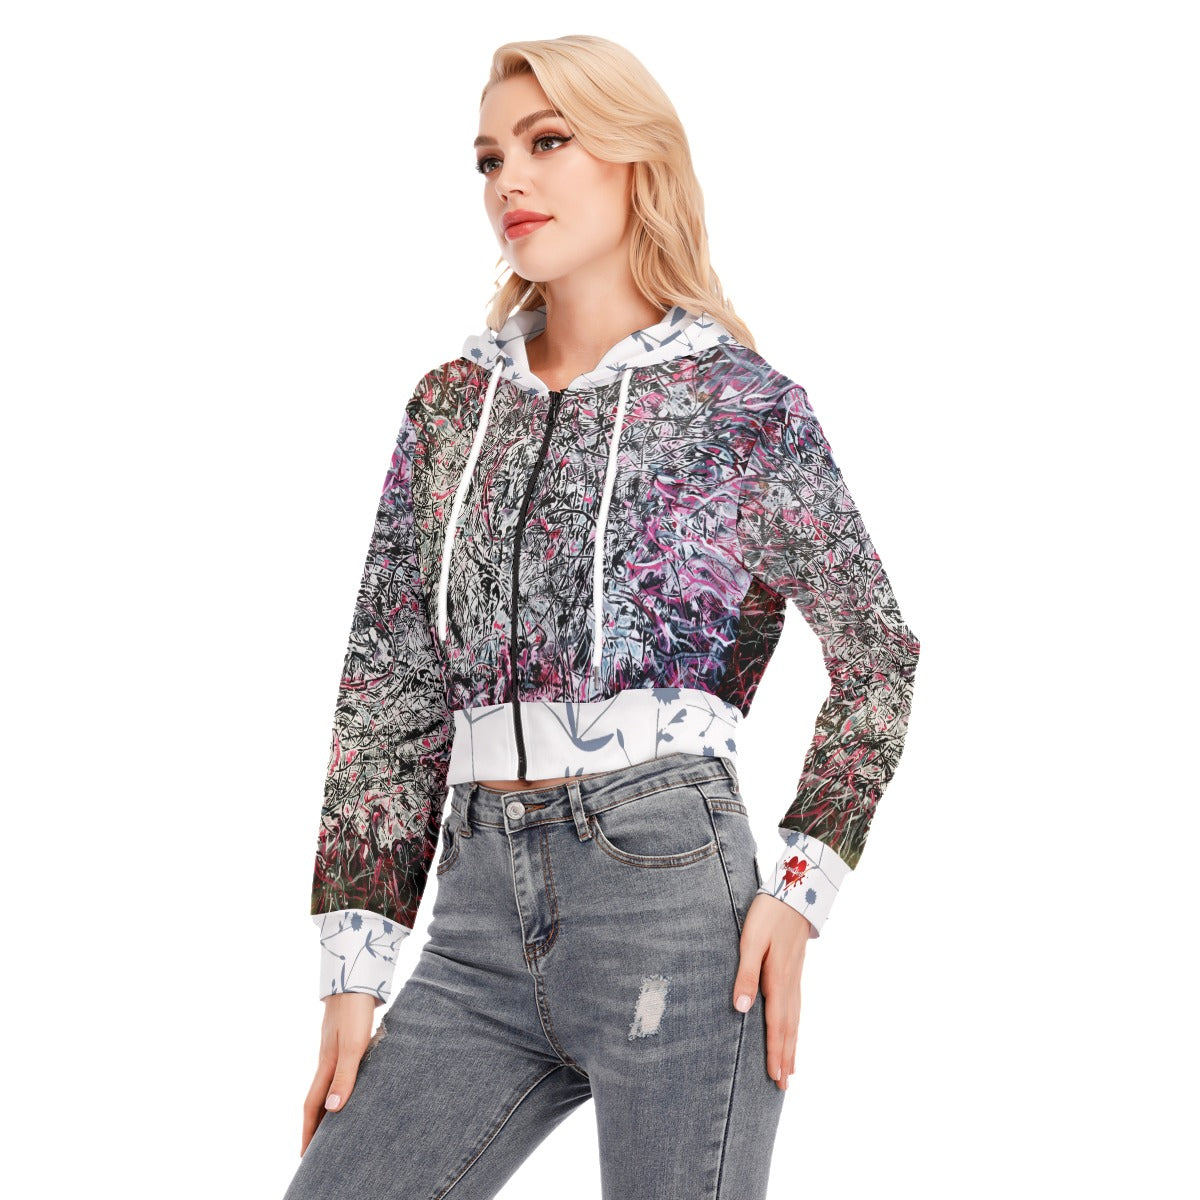 All-Over Print Women's Crop Top Hoodie With Zipper Closure Winter Collection